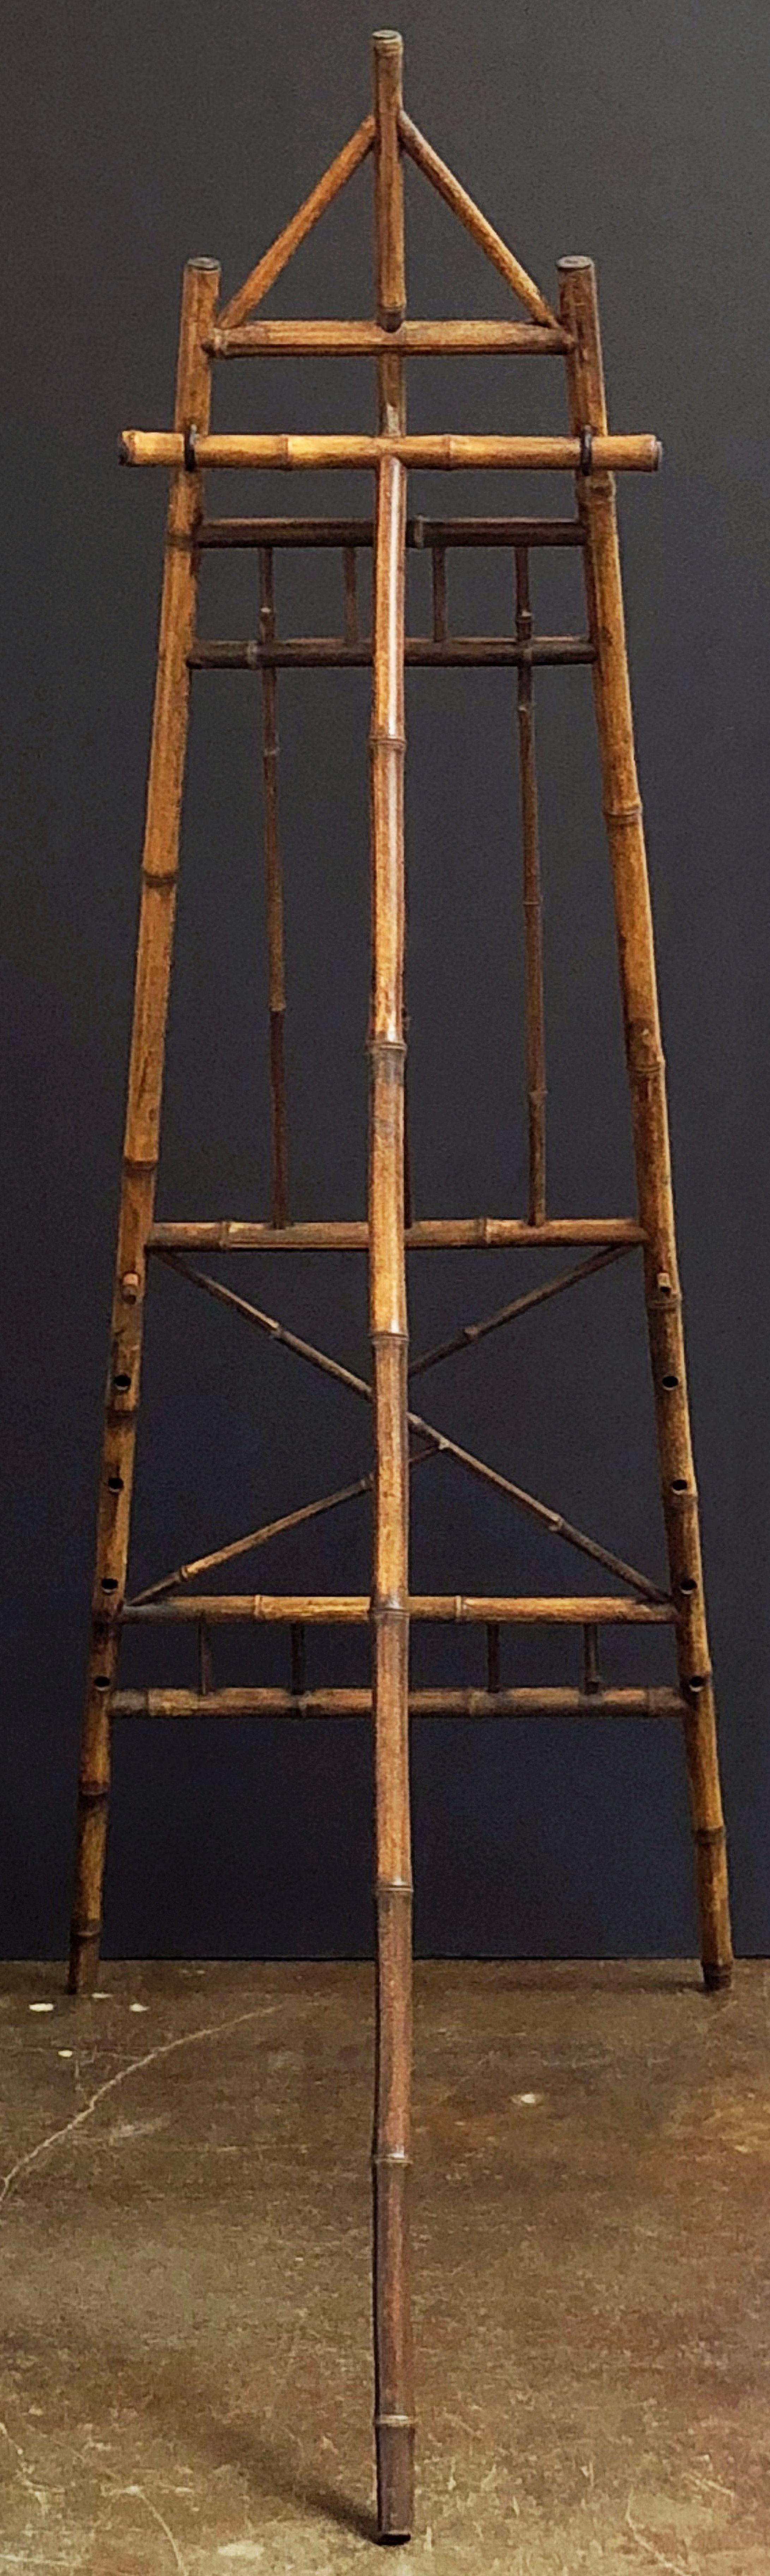 English Bamboo Display Easel from the Aesthetic Movement Period 1